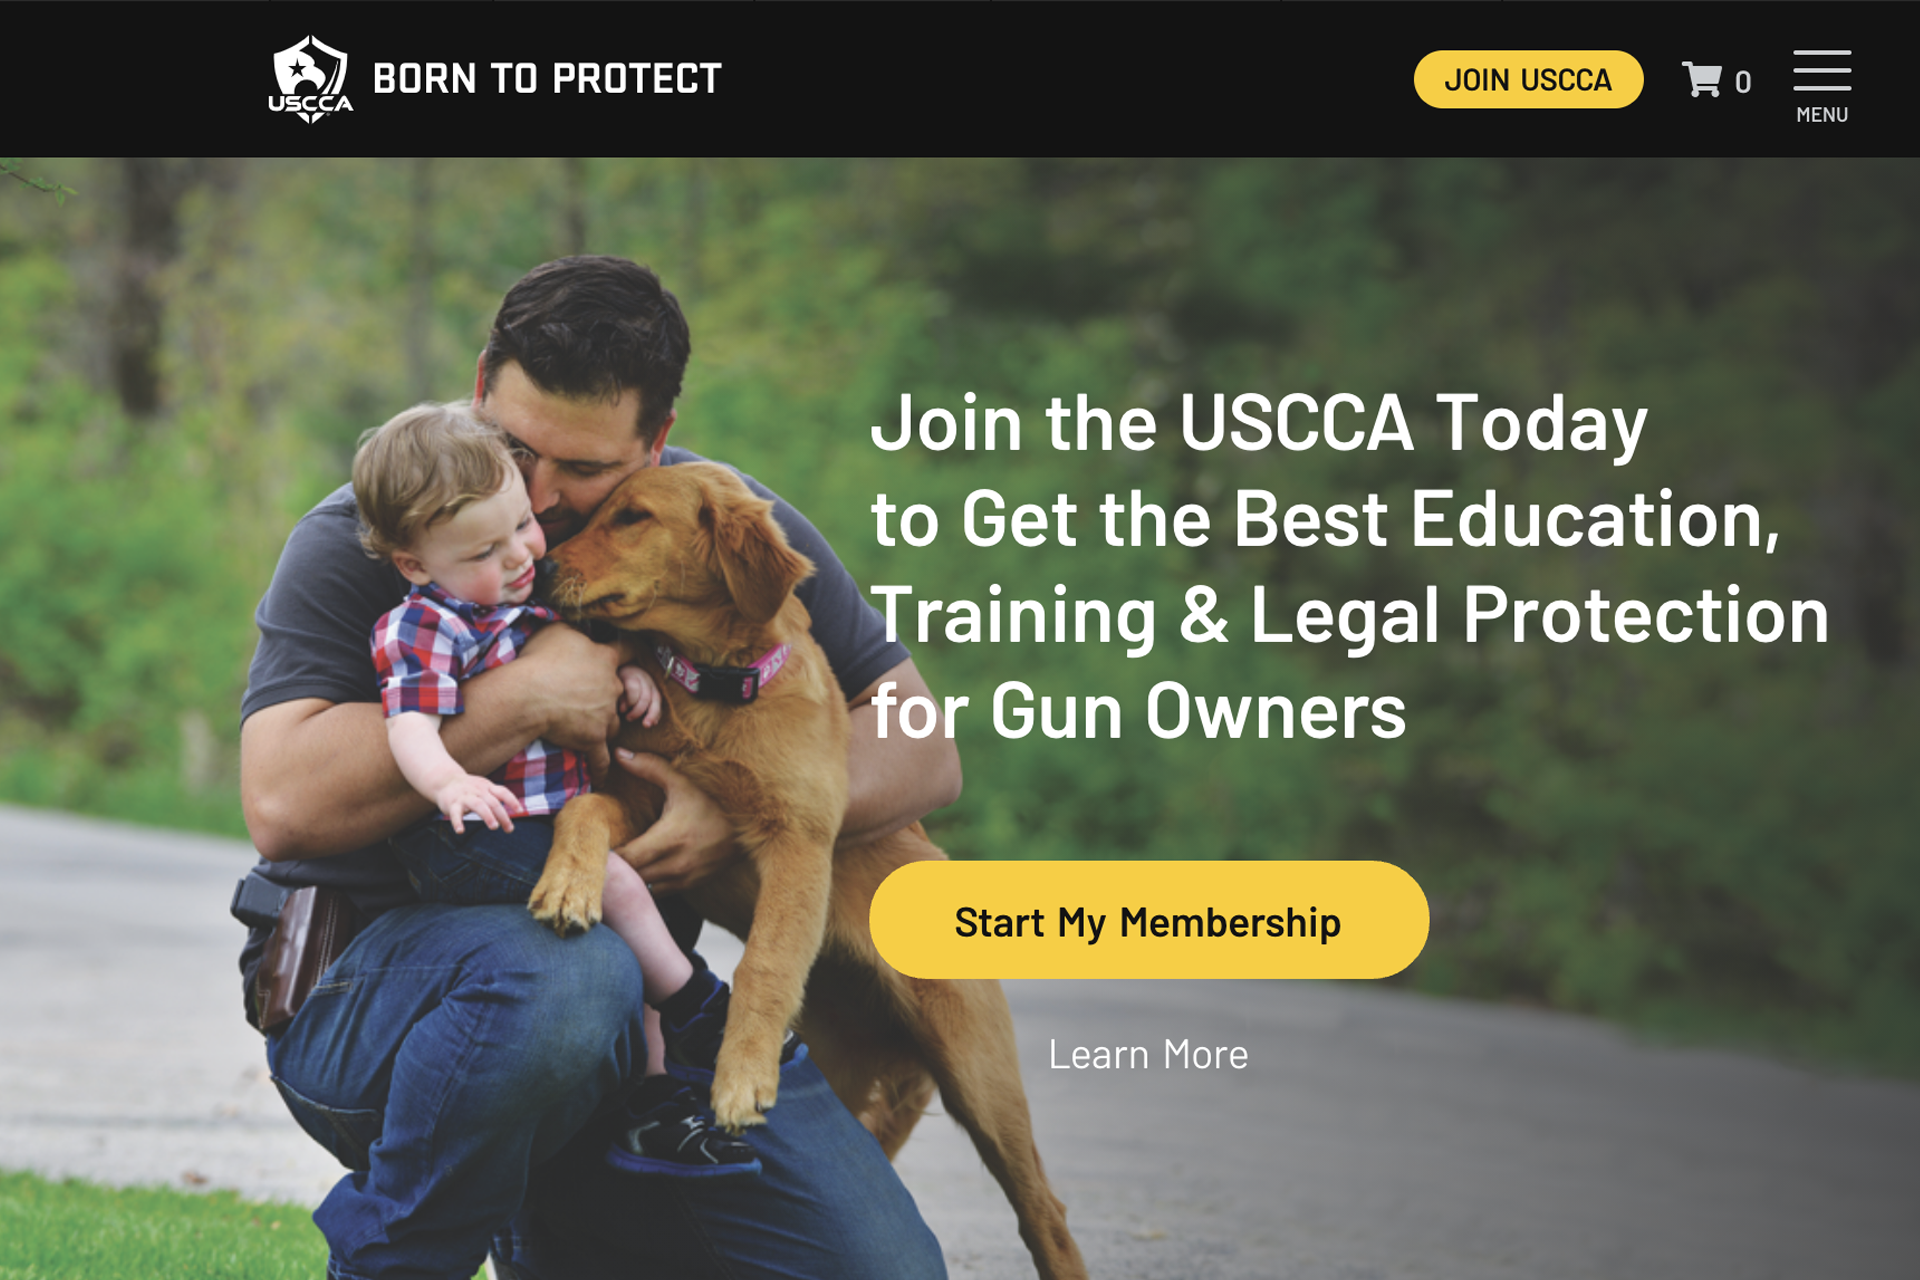 Sign Up for USCCA carry insurance sign up